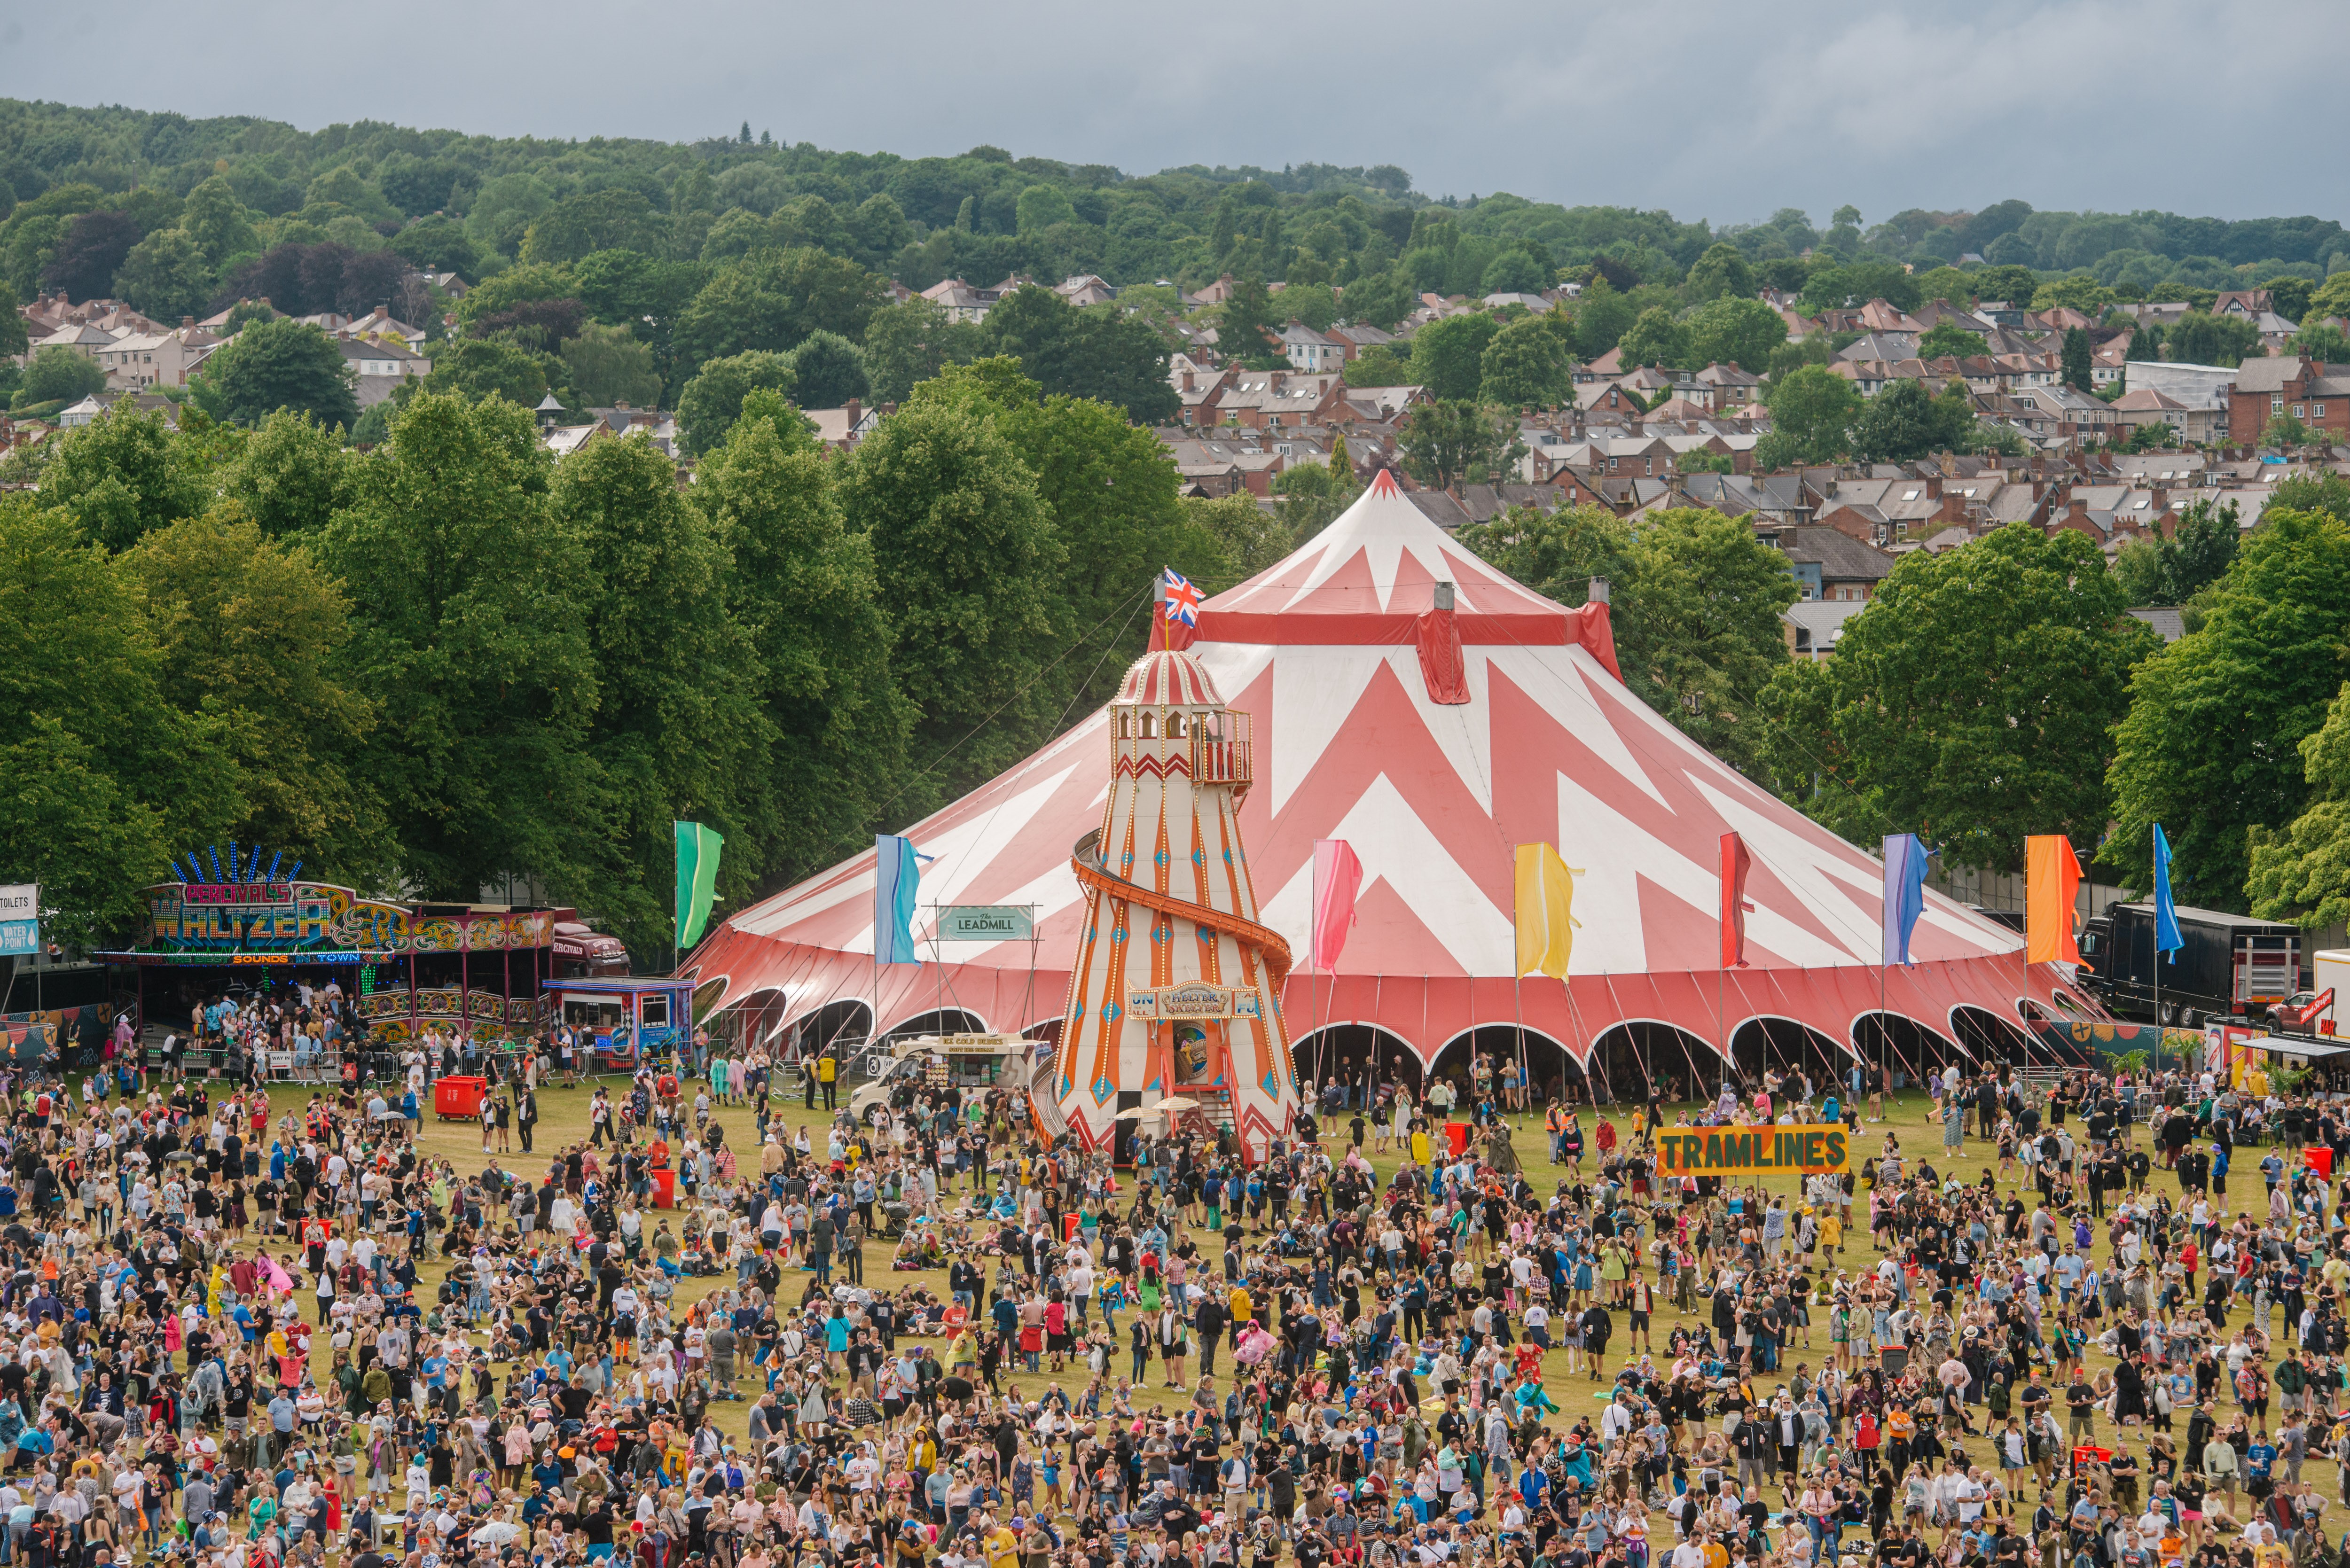 A huge crowd of people stand around a large festival tent, trees are in the background